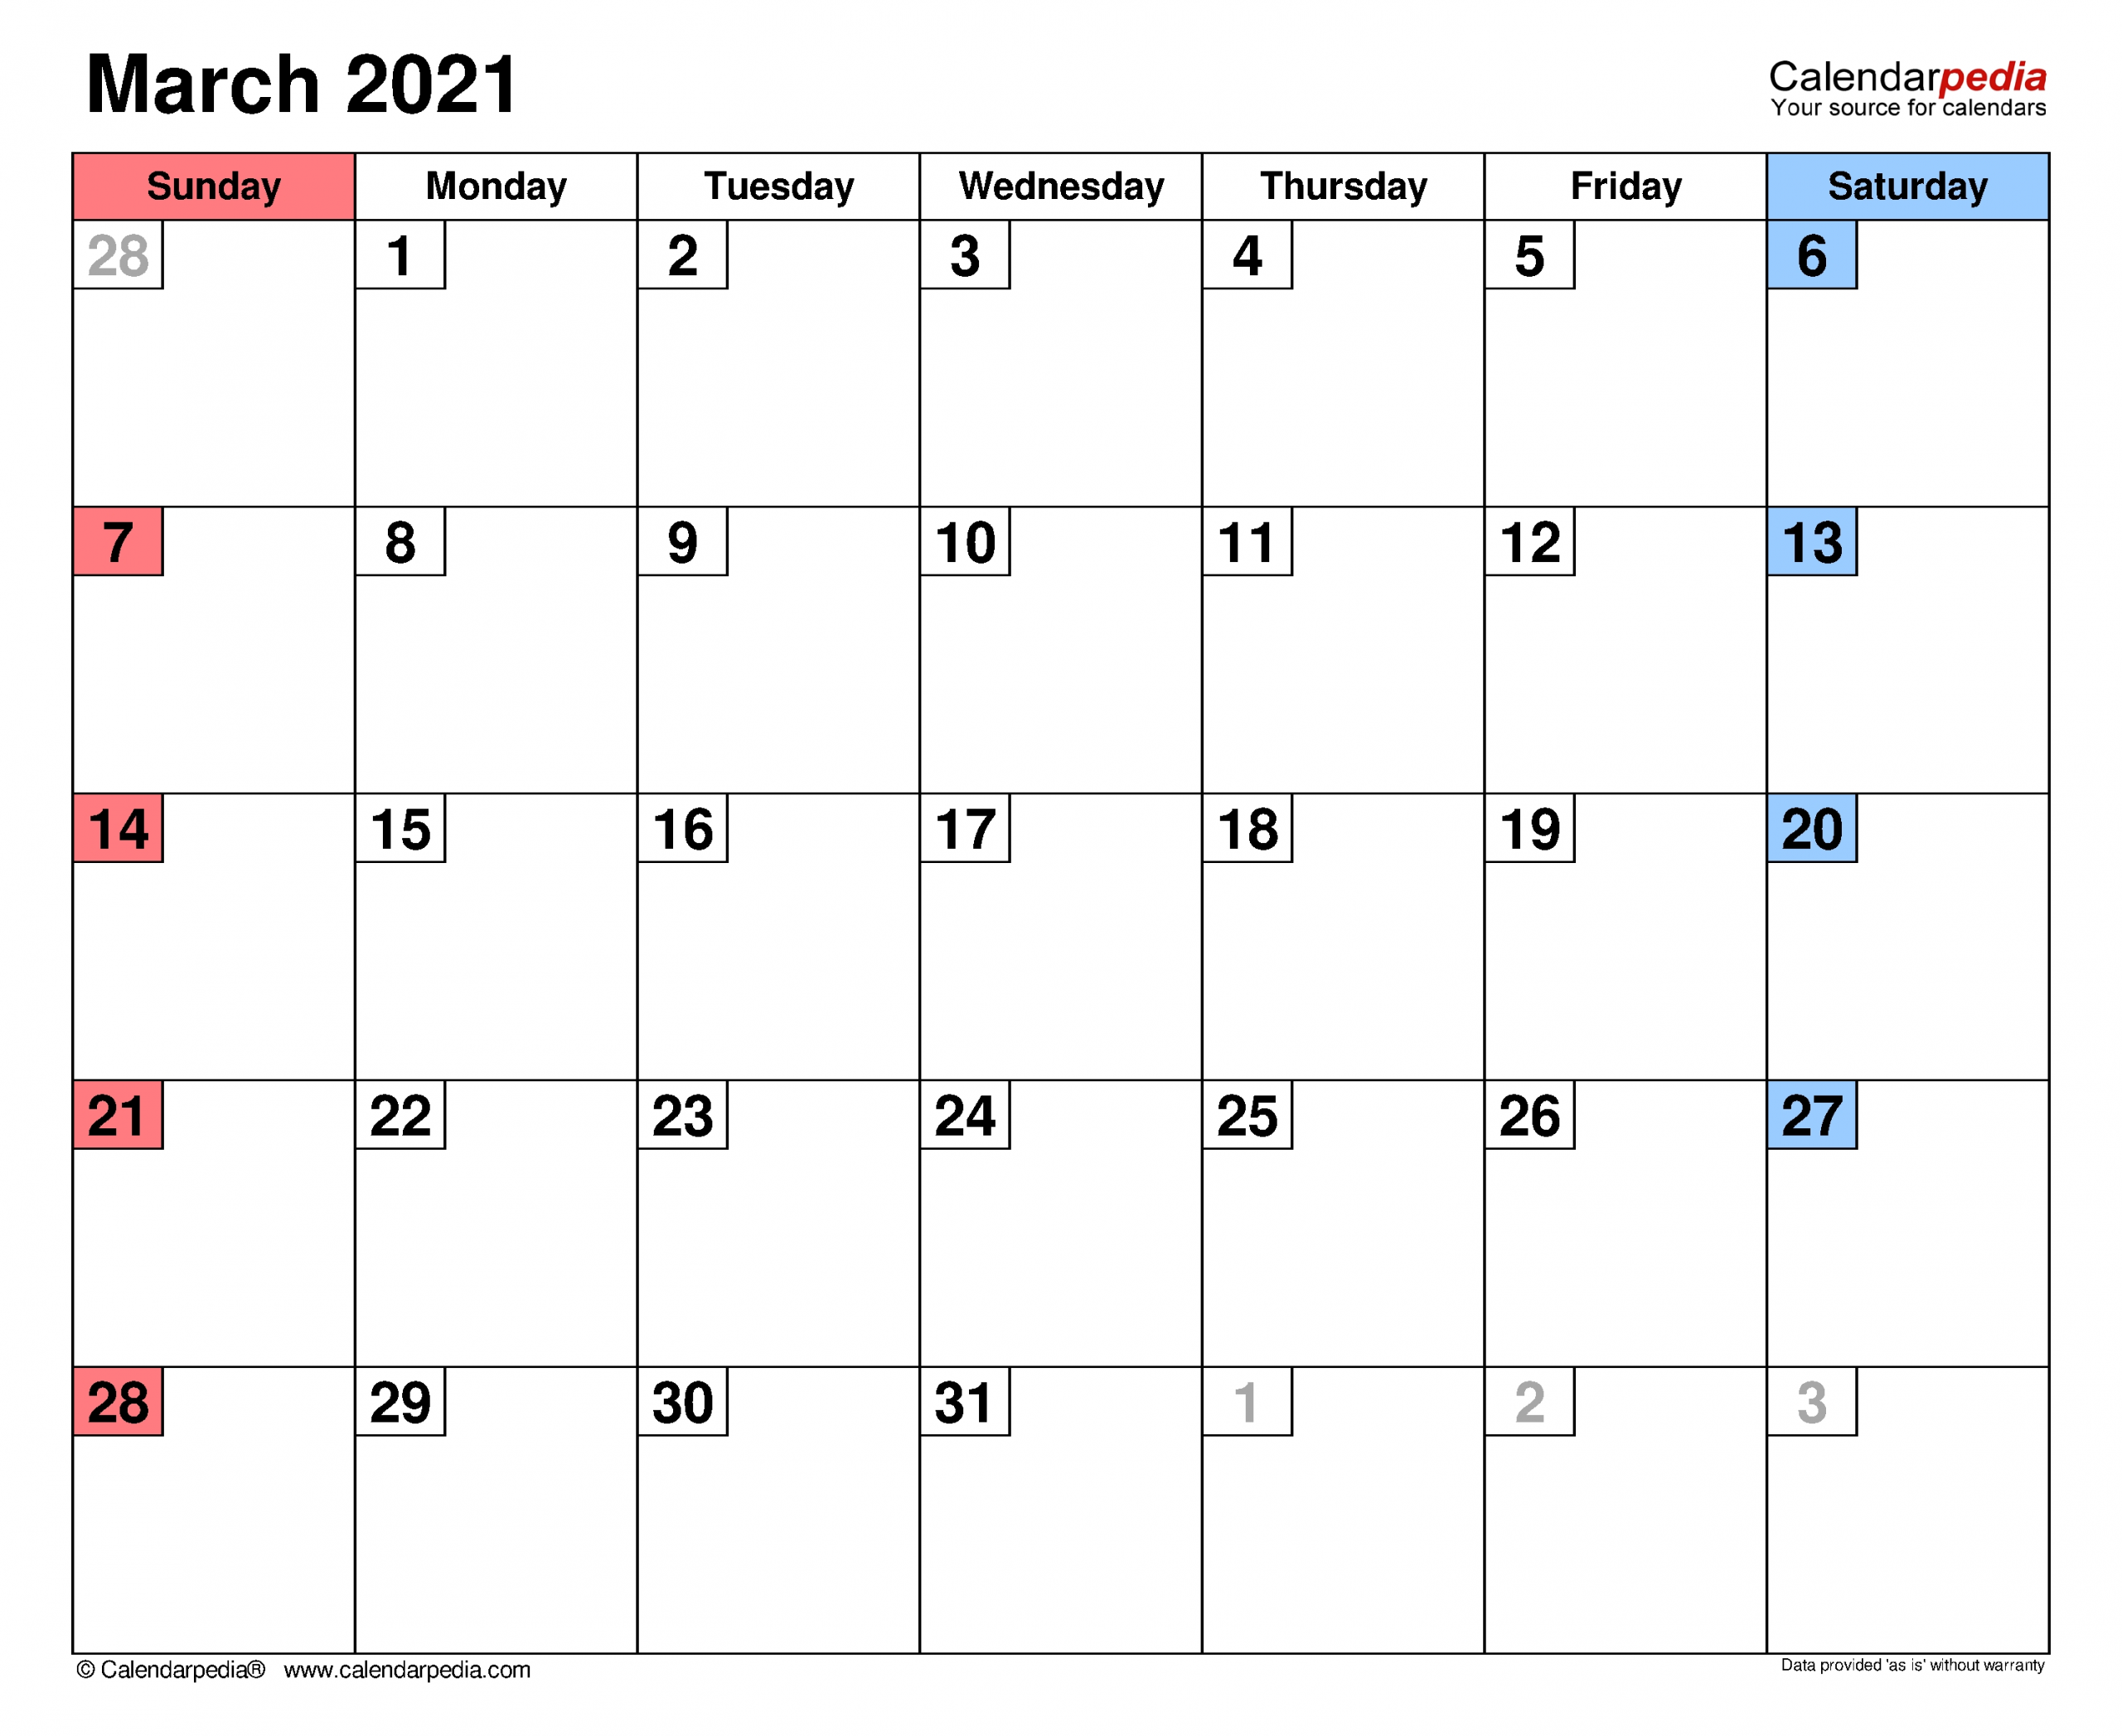 March 2021 Calendar | Templates For Word, Excel And Pdf